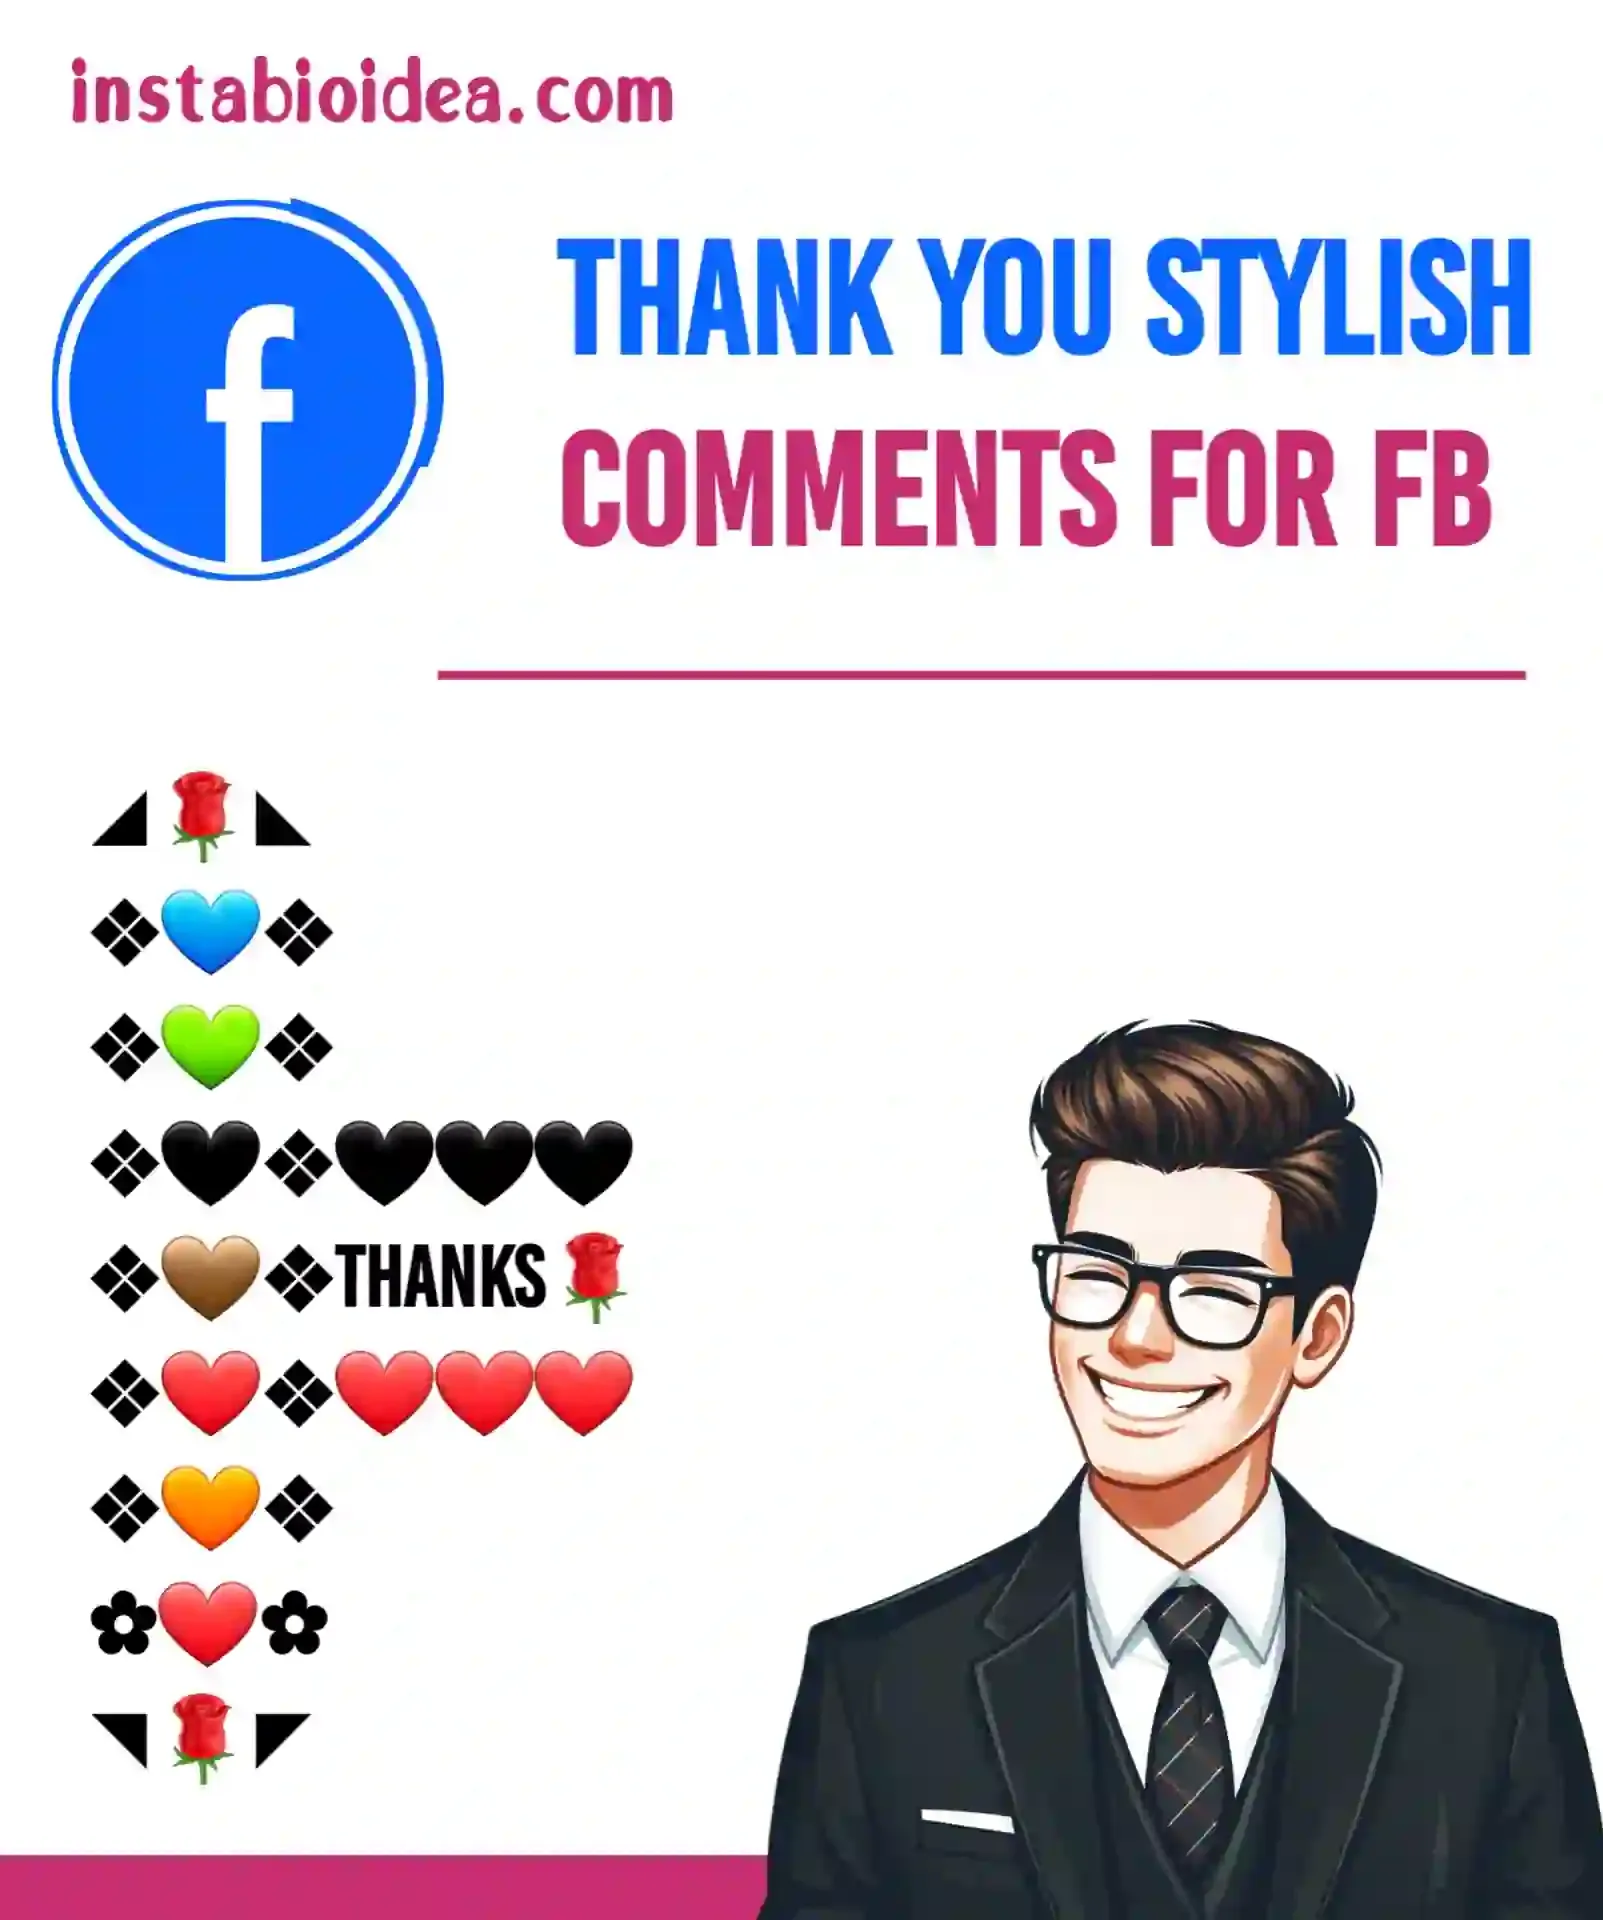 thankyou stylish comments for fb image